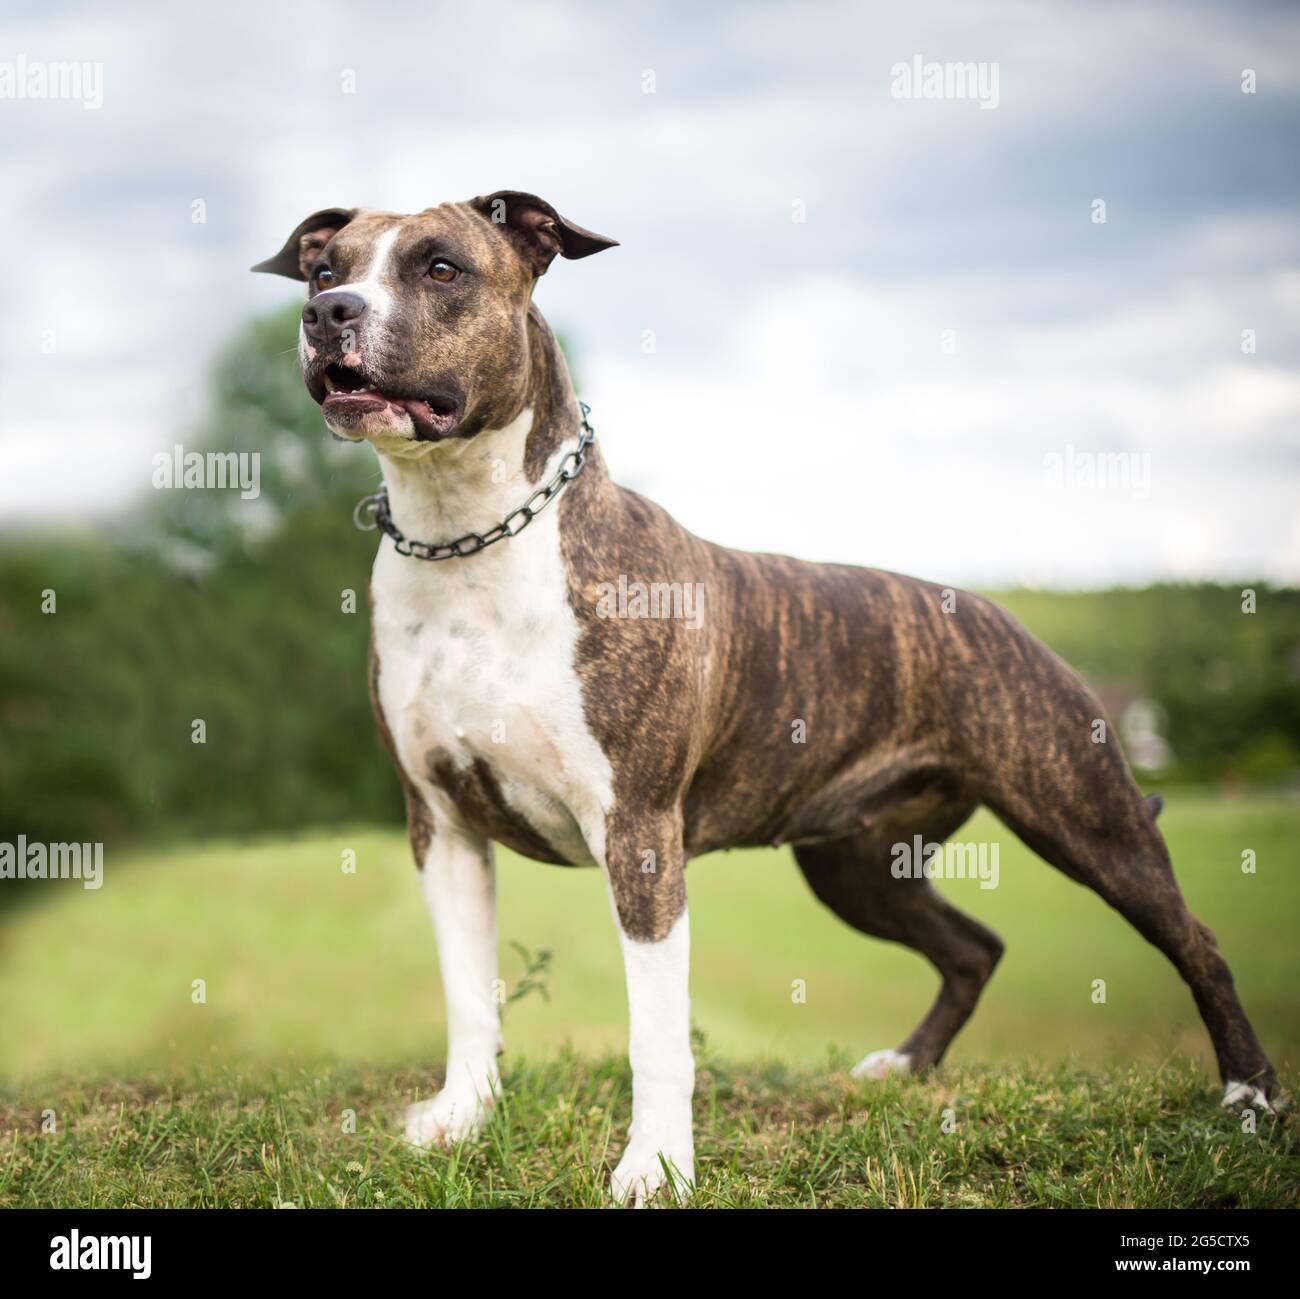 Brindle American Staffordshire Terrier Stock Photo